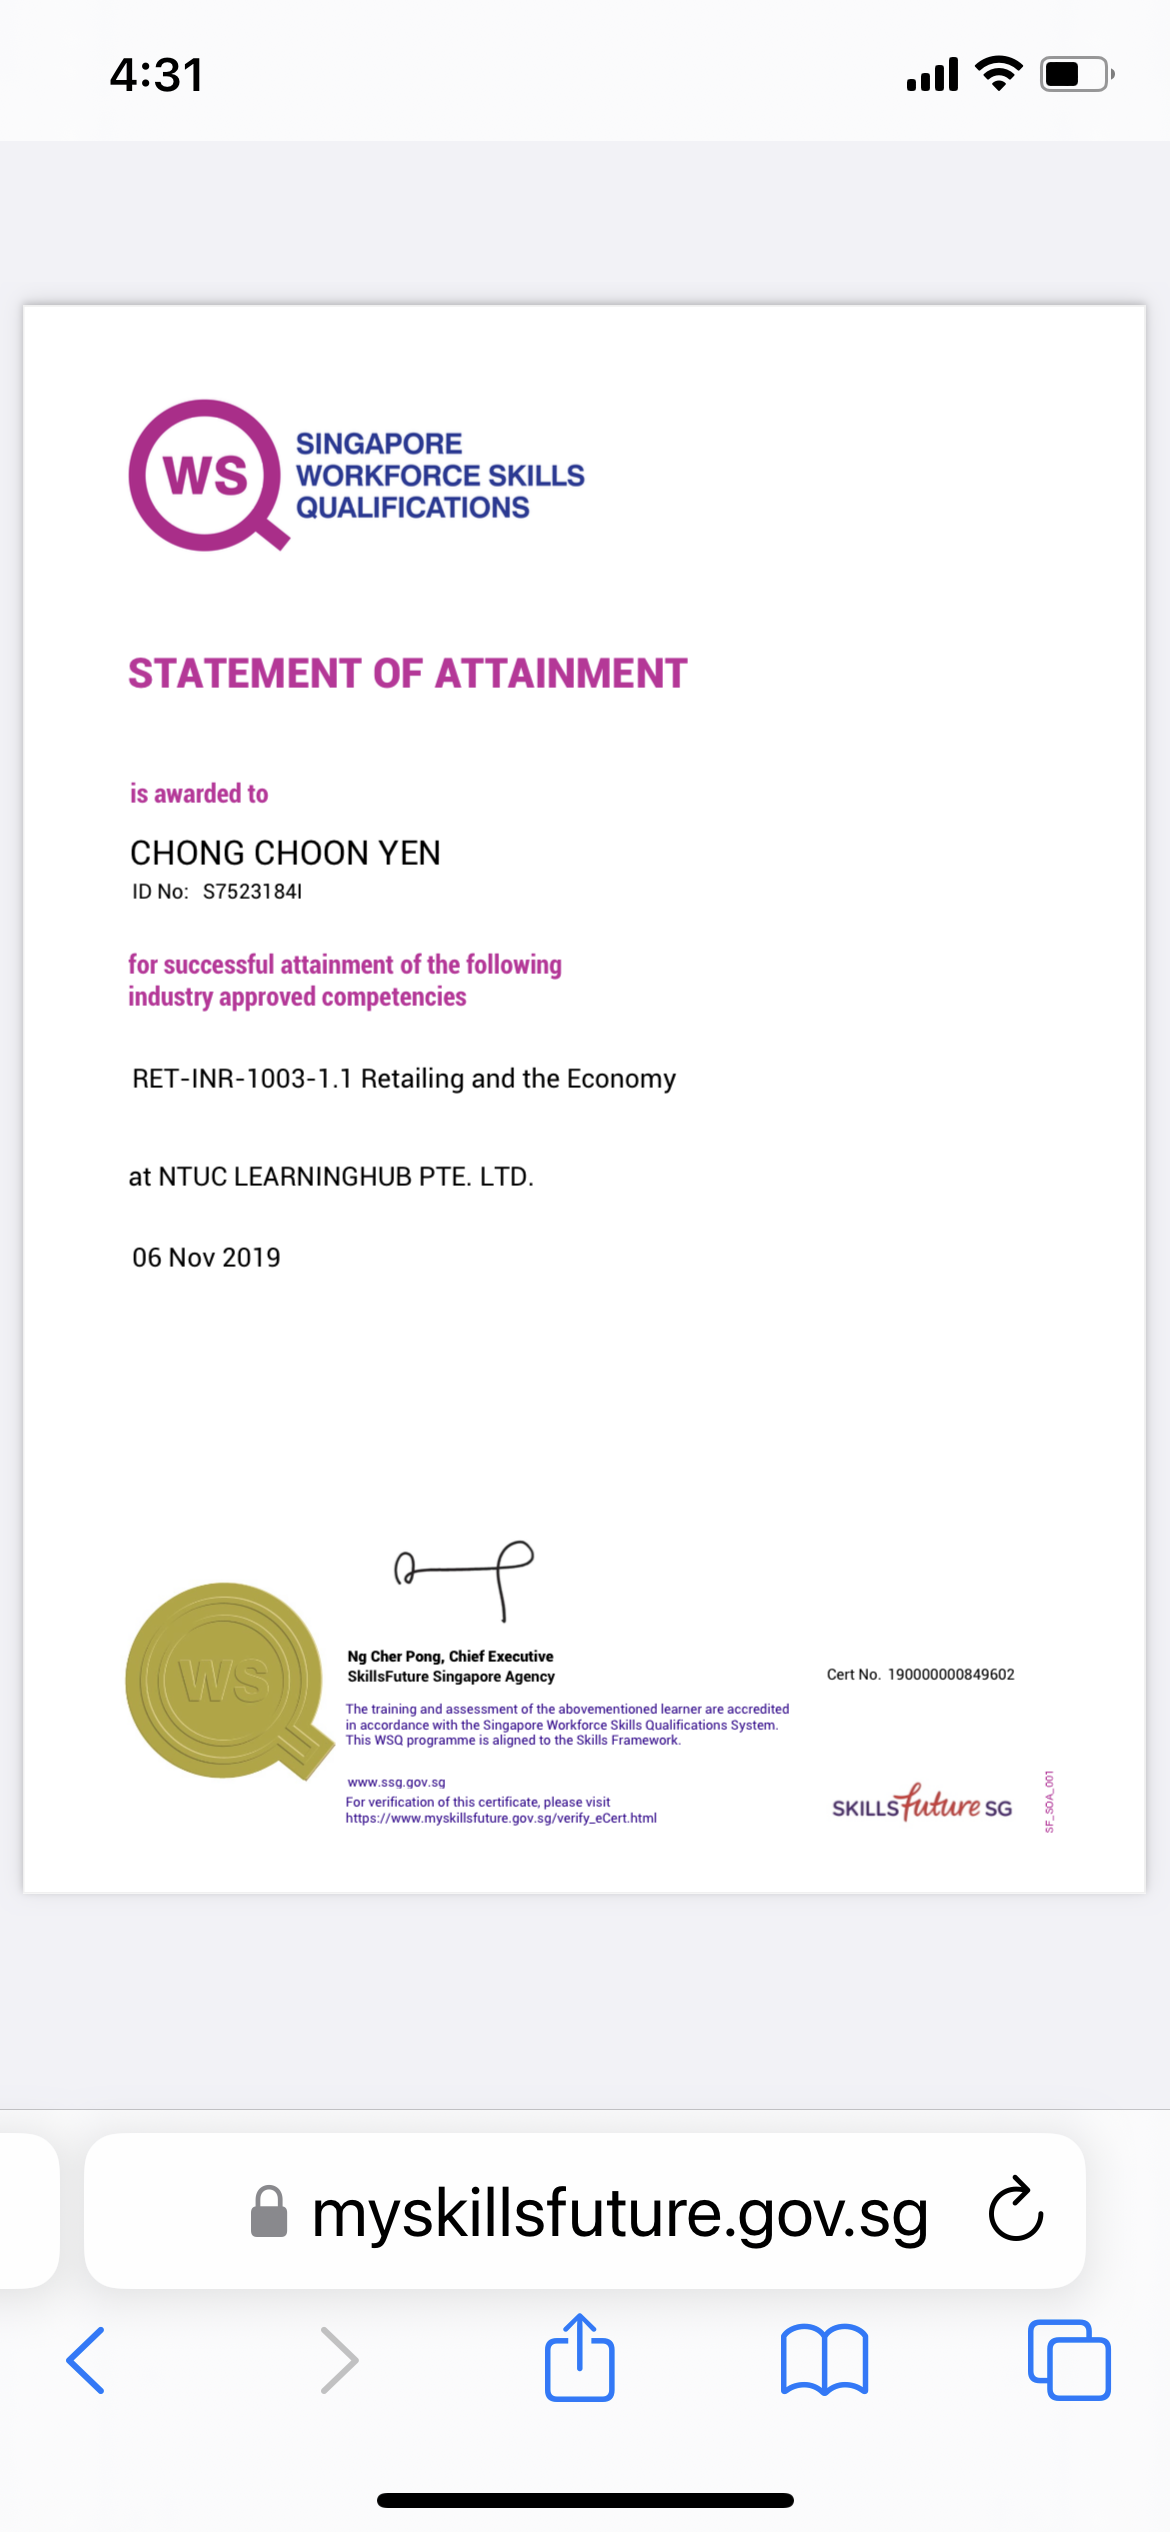 4:31 al FT @)

SINGAPORE
WORKFORCE SKILLS
QUALIFICATIONS

STATEMENT OF ATTAINMENT

is awarded to

CHONG CHOON YEN

ID No: $75231841

for successful attainment of the following
industry approved competencies

RET-INR-1003-1.1 Retailing and the Economy

at NTUC LEARNINGHUB PTE. LTD.

06 Nov 2019

—f

Ng Cher Pong, Chief Executive
SkillsFuture Singapore Agency Cert No. 190000000849602
The ranng and assessment of the abovementioned learner are accredried

in accordance with the Singapare Workforce Skills Quakfications System
This WSQ programme is aligned 10 the Skills Framework

 

www $53 90¥ 83
For verification of this certificate. please visit
Detps /Fveww myskilisfuture gov 39/verity_eCert hm SKILLS SG

&amp; myskillsfuture.gov.sg C
hm